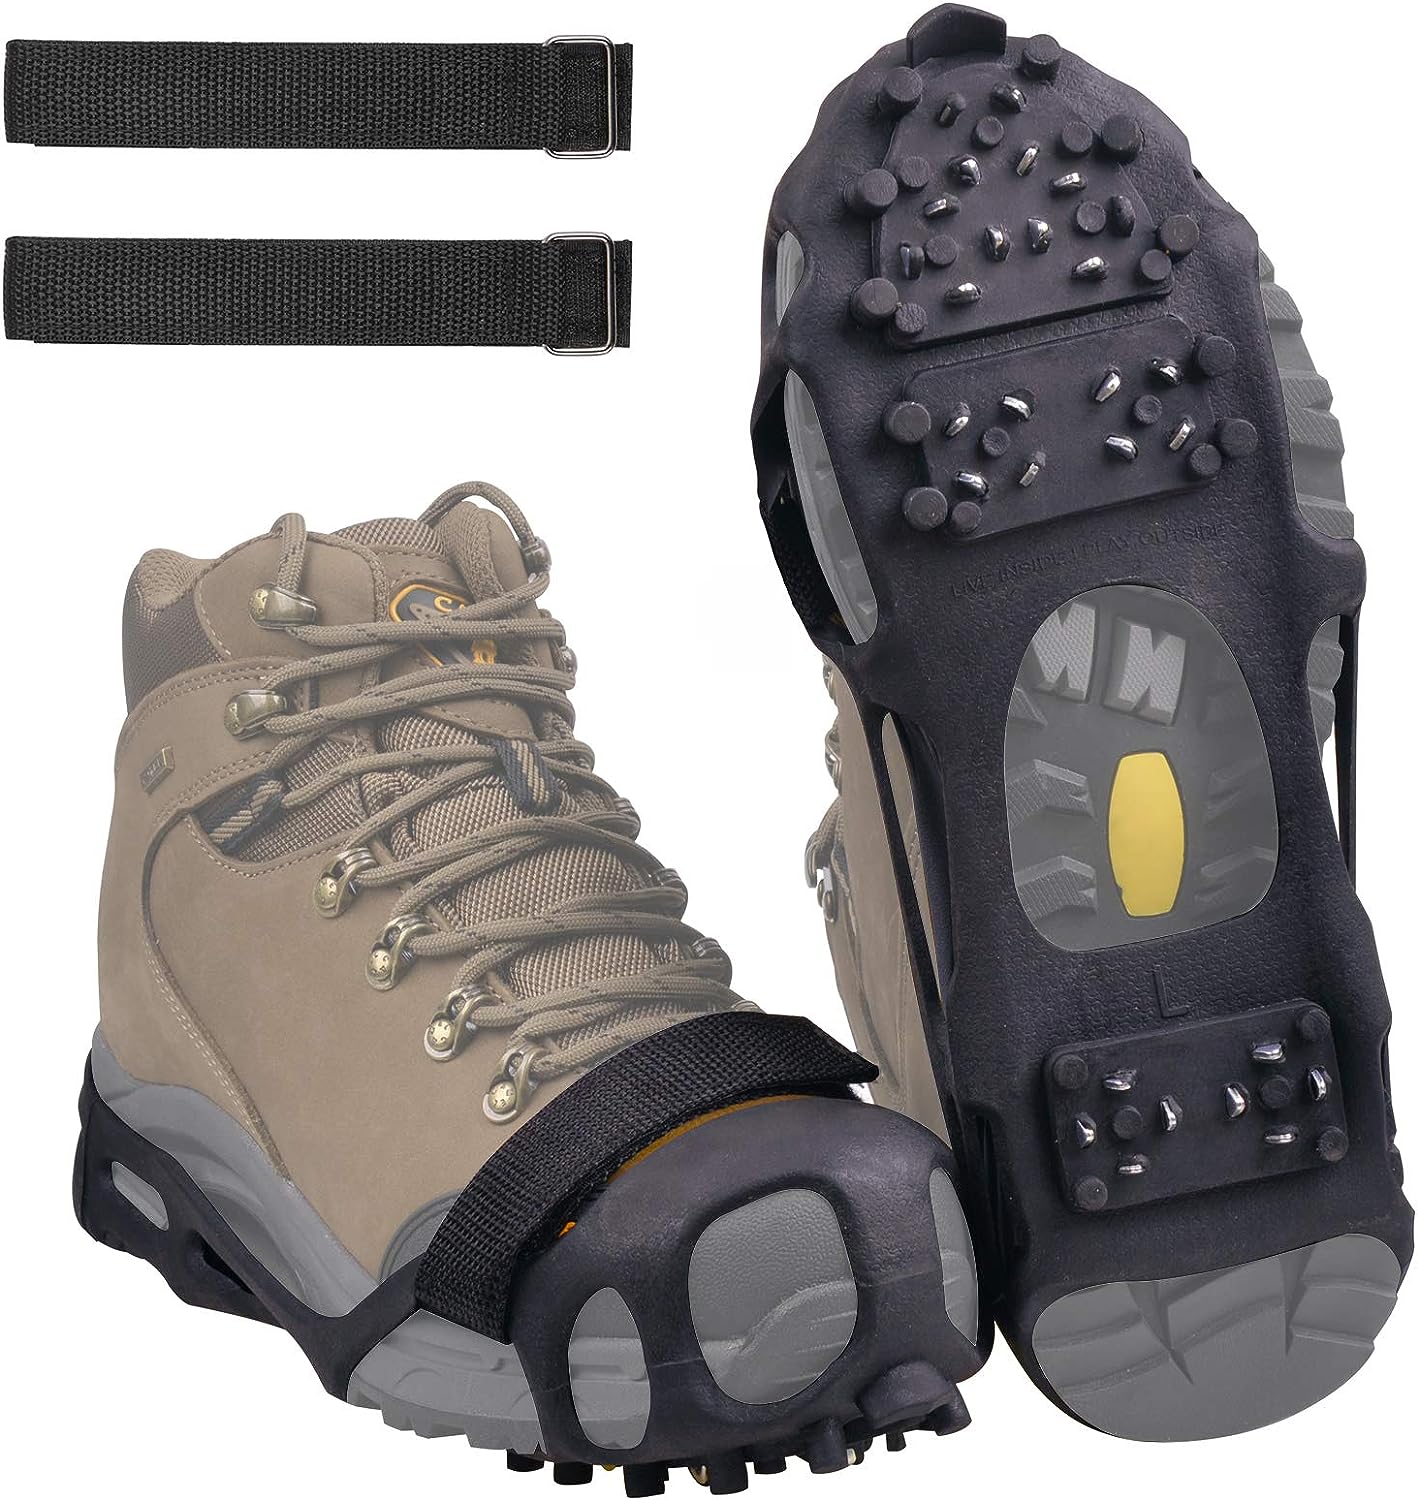 Ice Cleats Snow Traction Cleats for Walking on Snow [...]